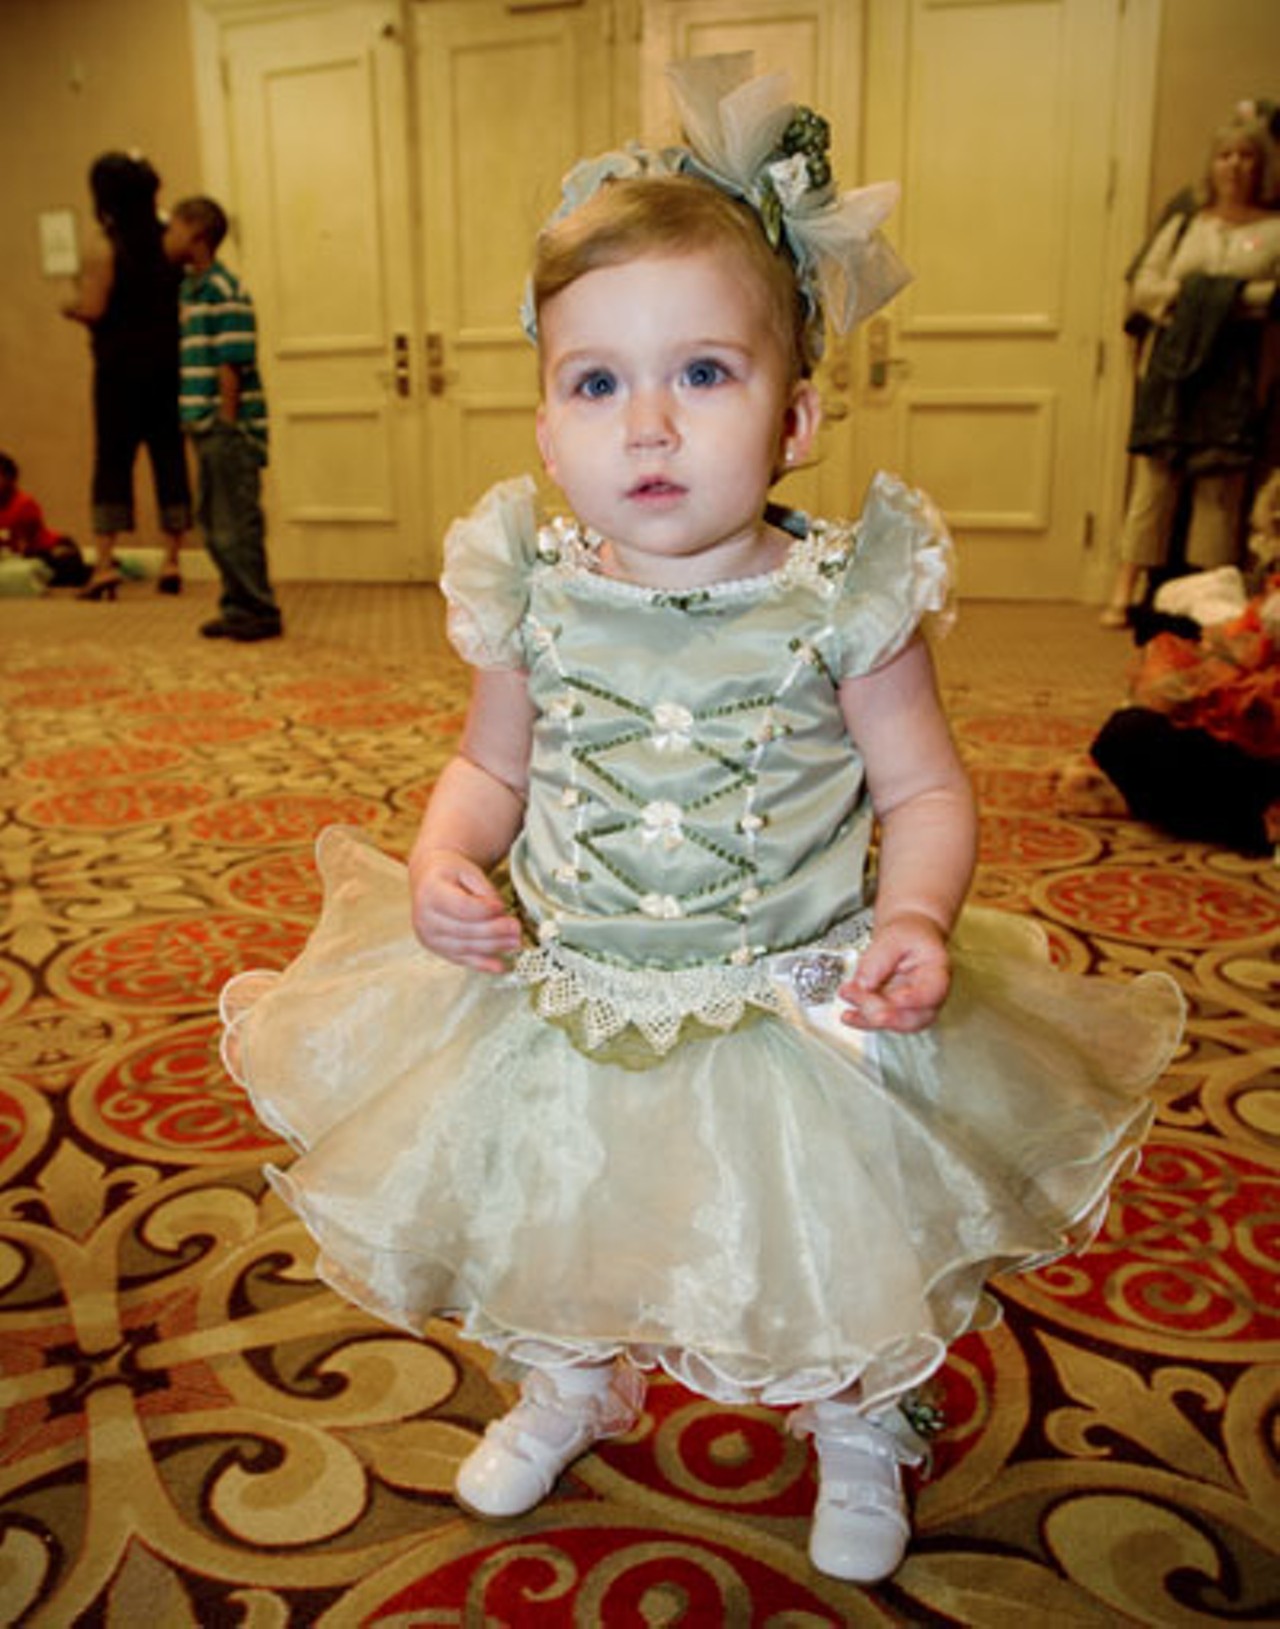 Alexyss Raine-Marie Keener from LaGrange, Indiana. Fourteen-months-old and wearing a dress her grandmother made. Some baby dresses can be found on eBay for the bargain price of around $600. New ones for your little one can cost as much as $1,000.